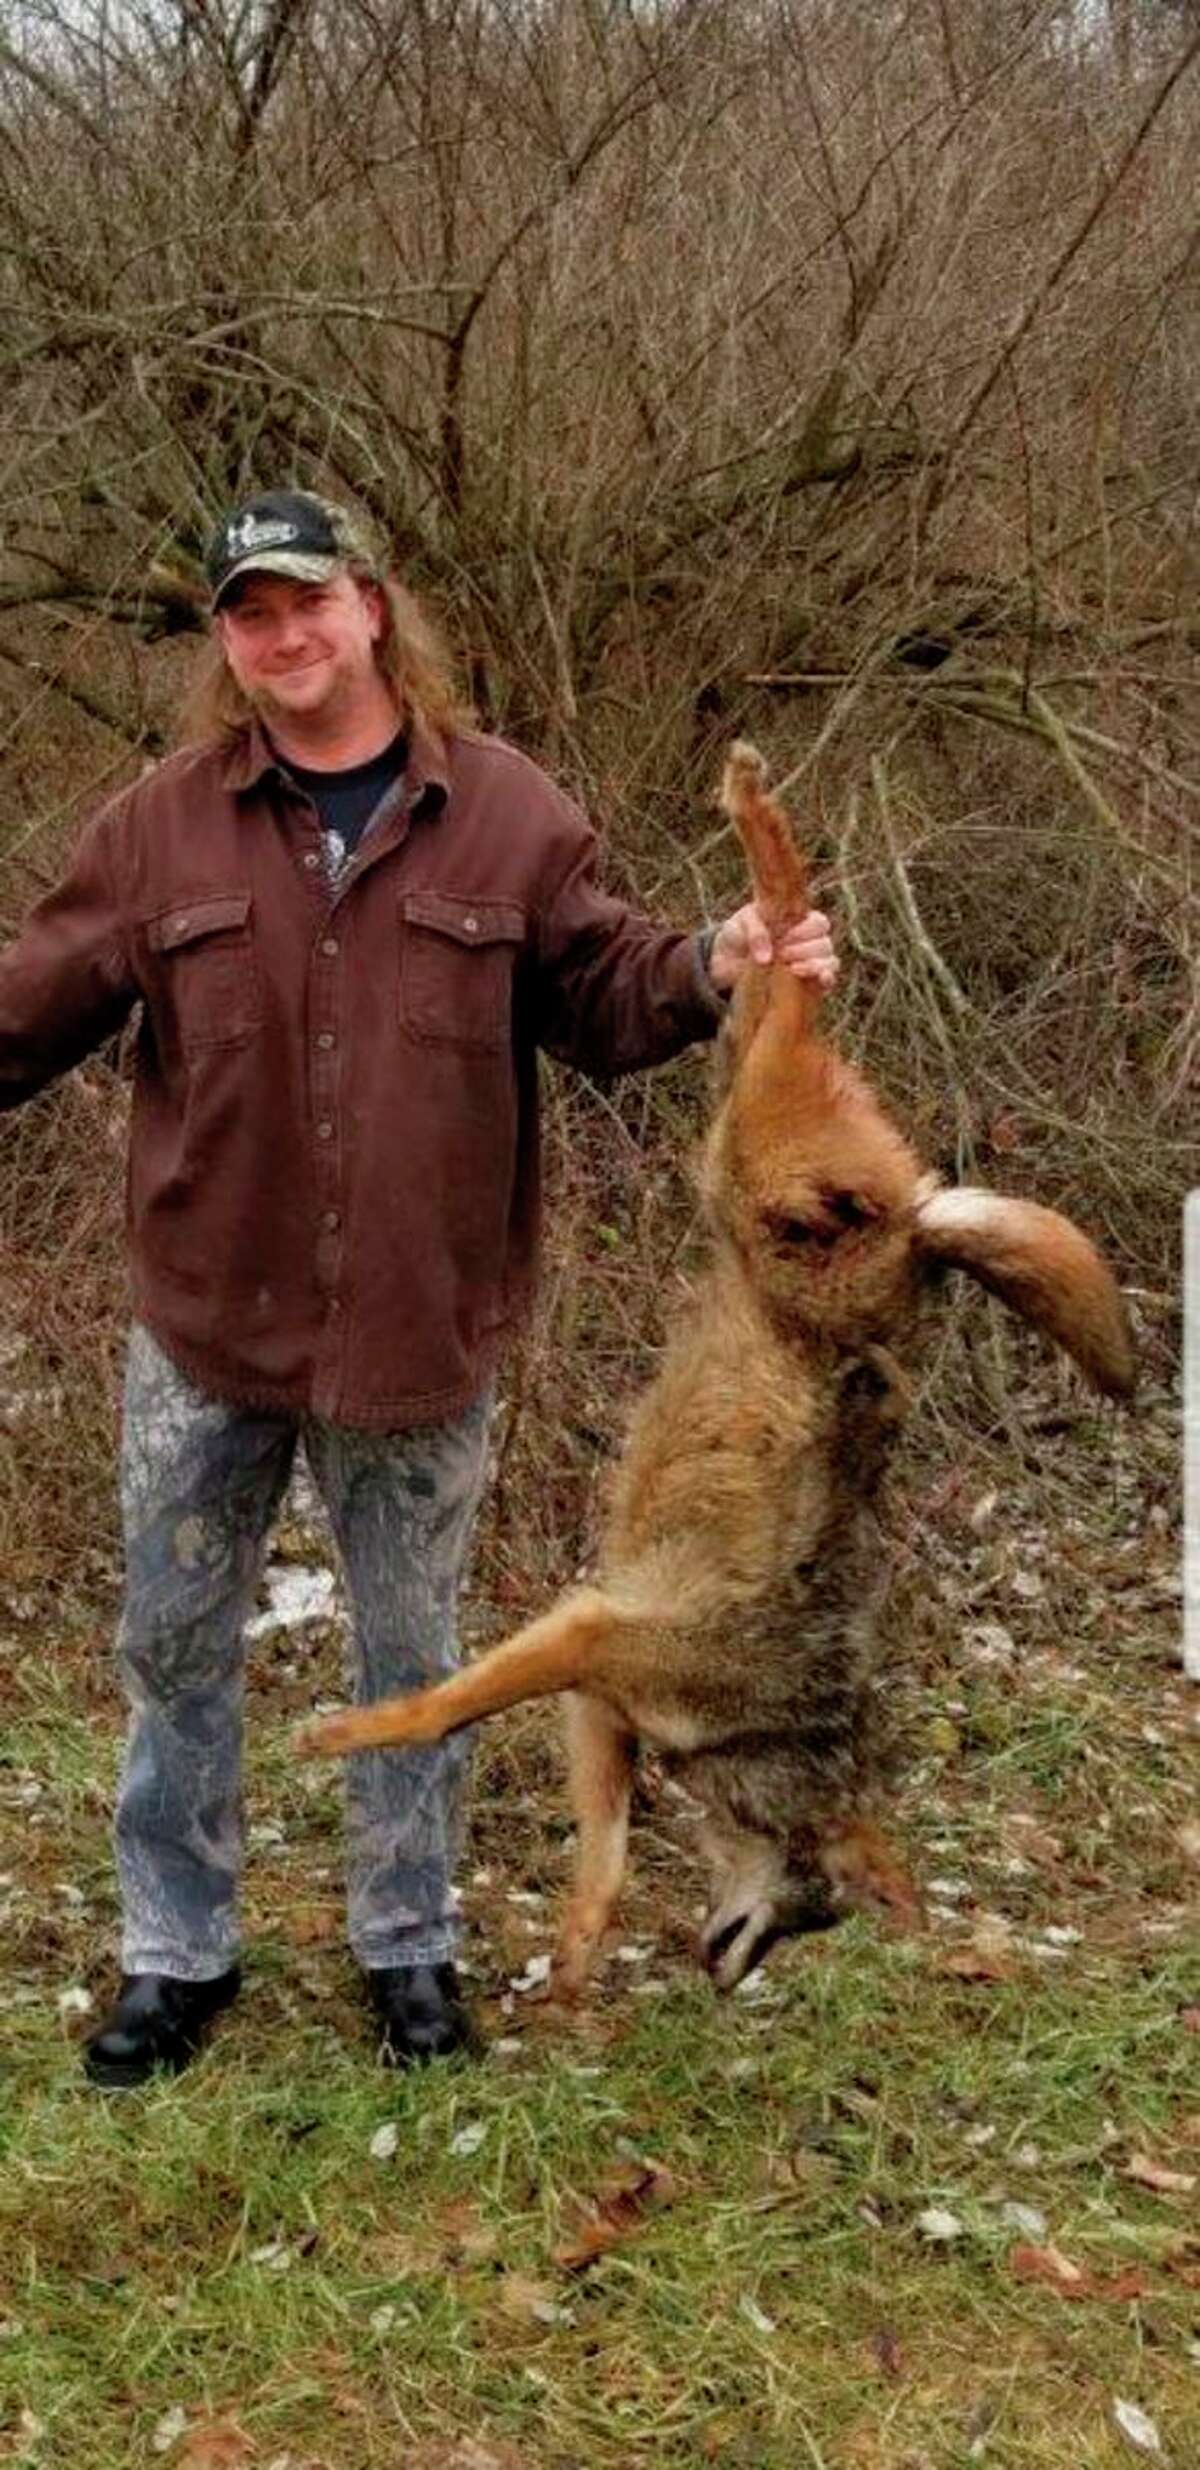 Don Burnette of Cass City recently shot this large male coyote while on a 'coyote drive' with friends in the Thumb. He shot the running coyote with his Ruger .204 bolt-action rifle. (Photo submitted by Don Burnette)